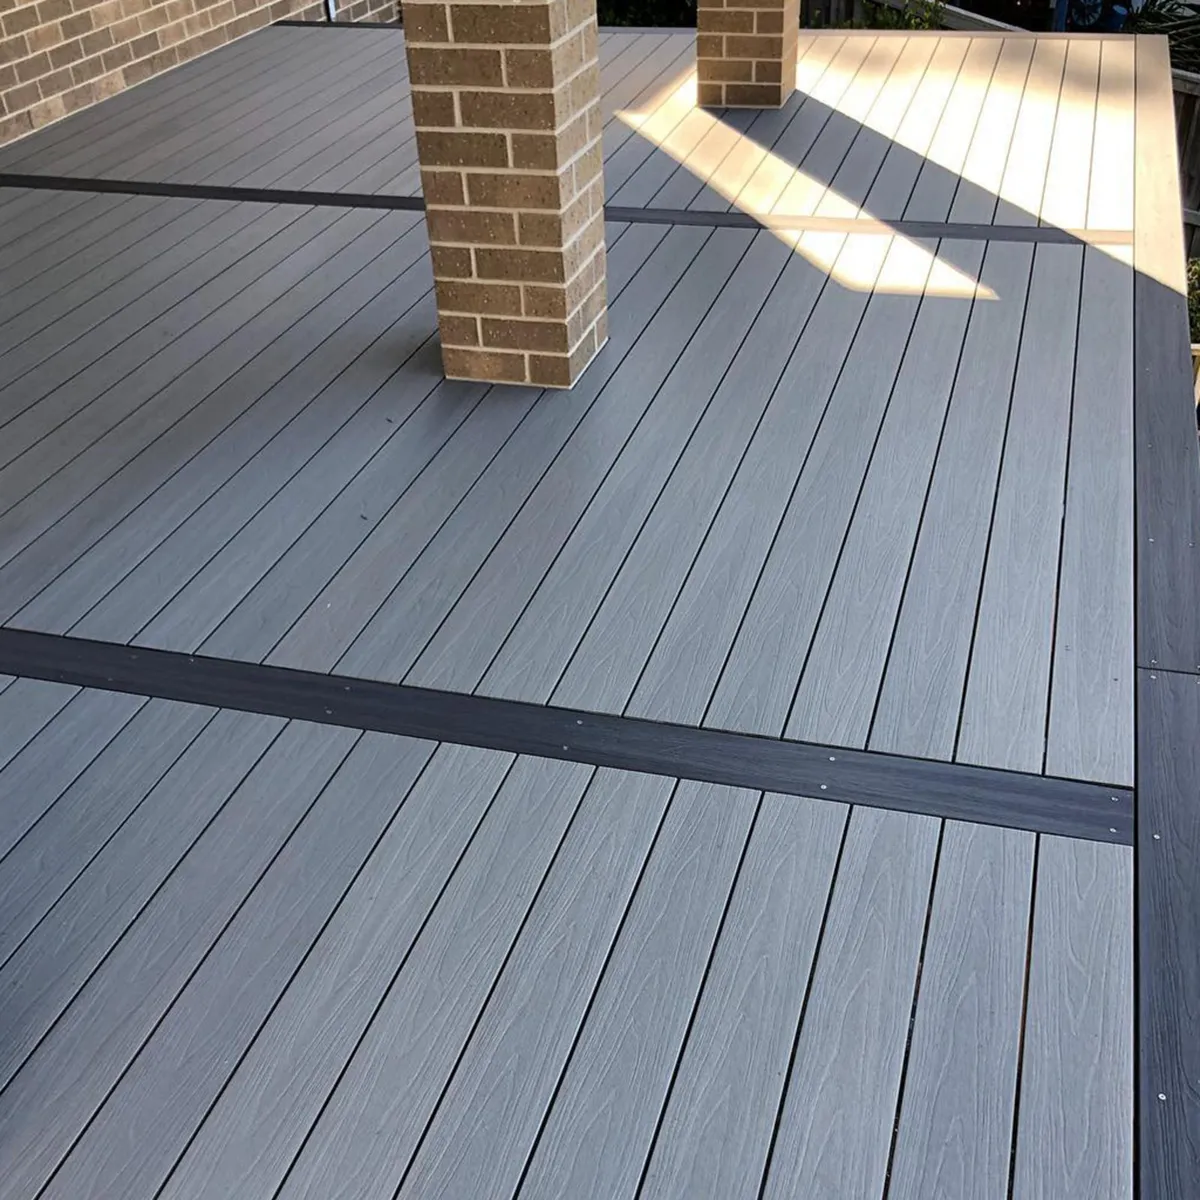 Fence / Decking boards